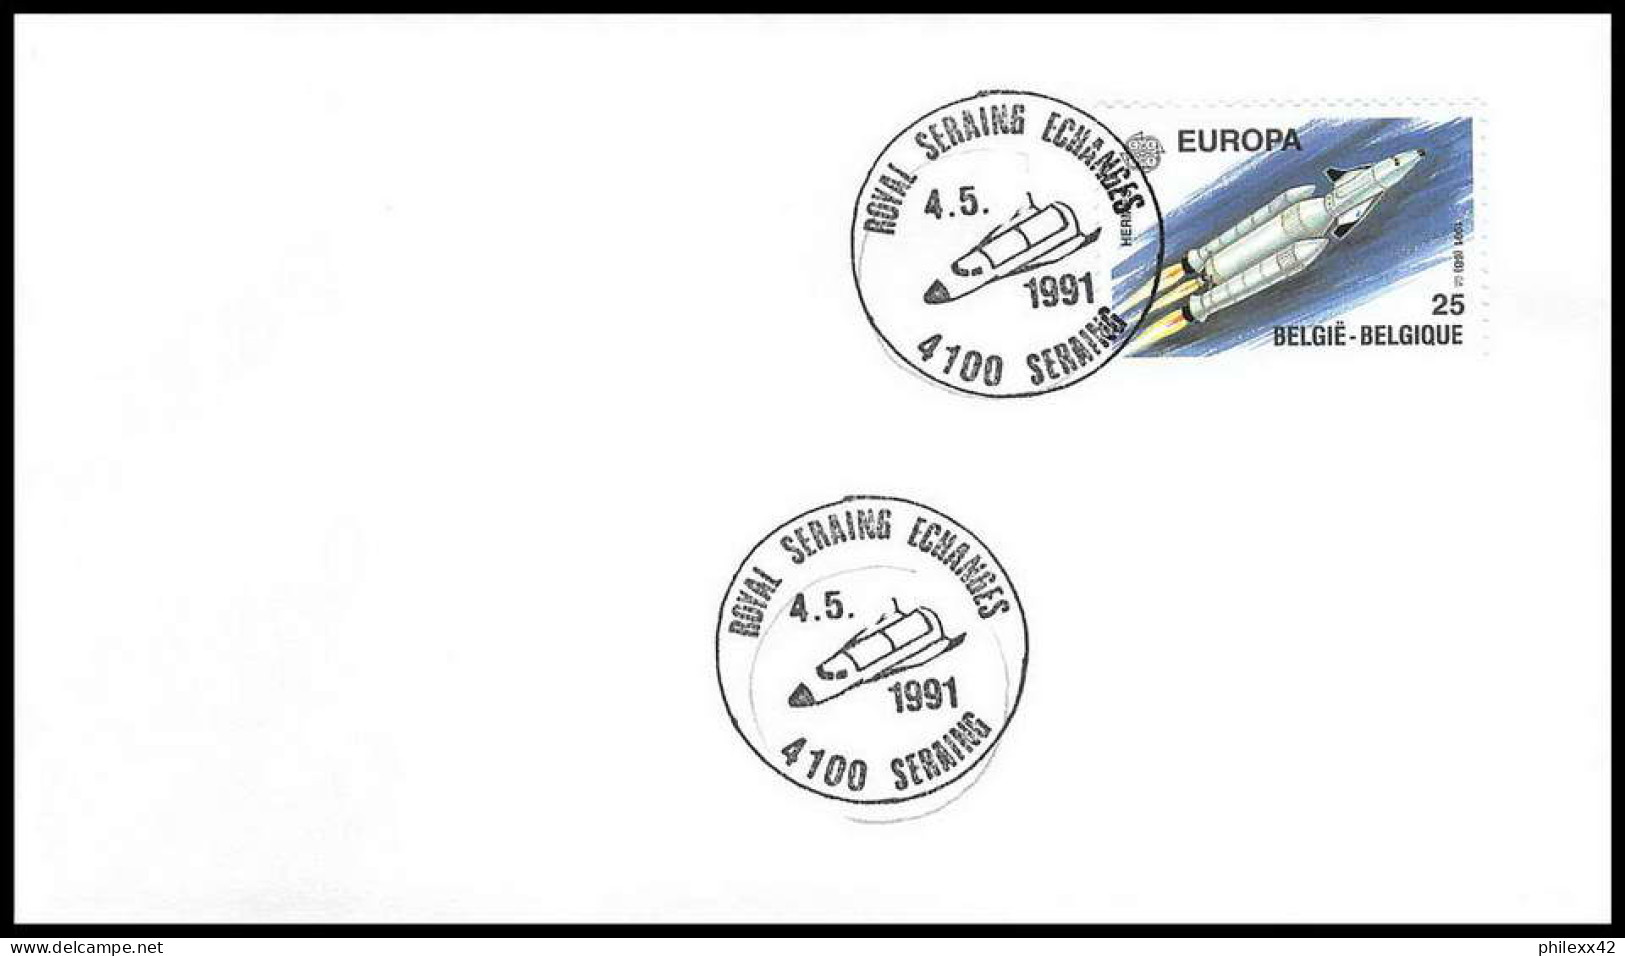 discount 75 cent piece  collection lot 3 - 69 Lettres covers espace spac) différentes usa japan russia france fdc